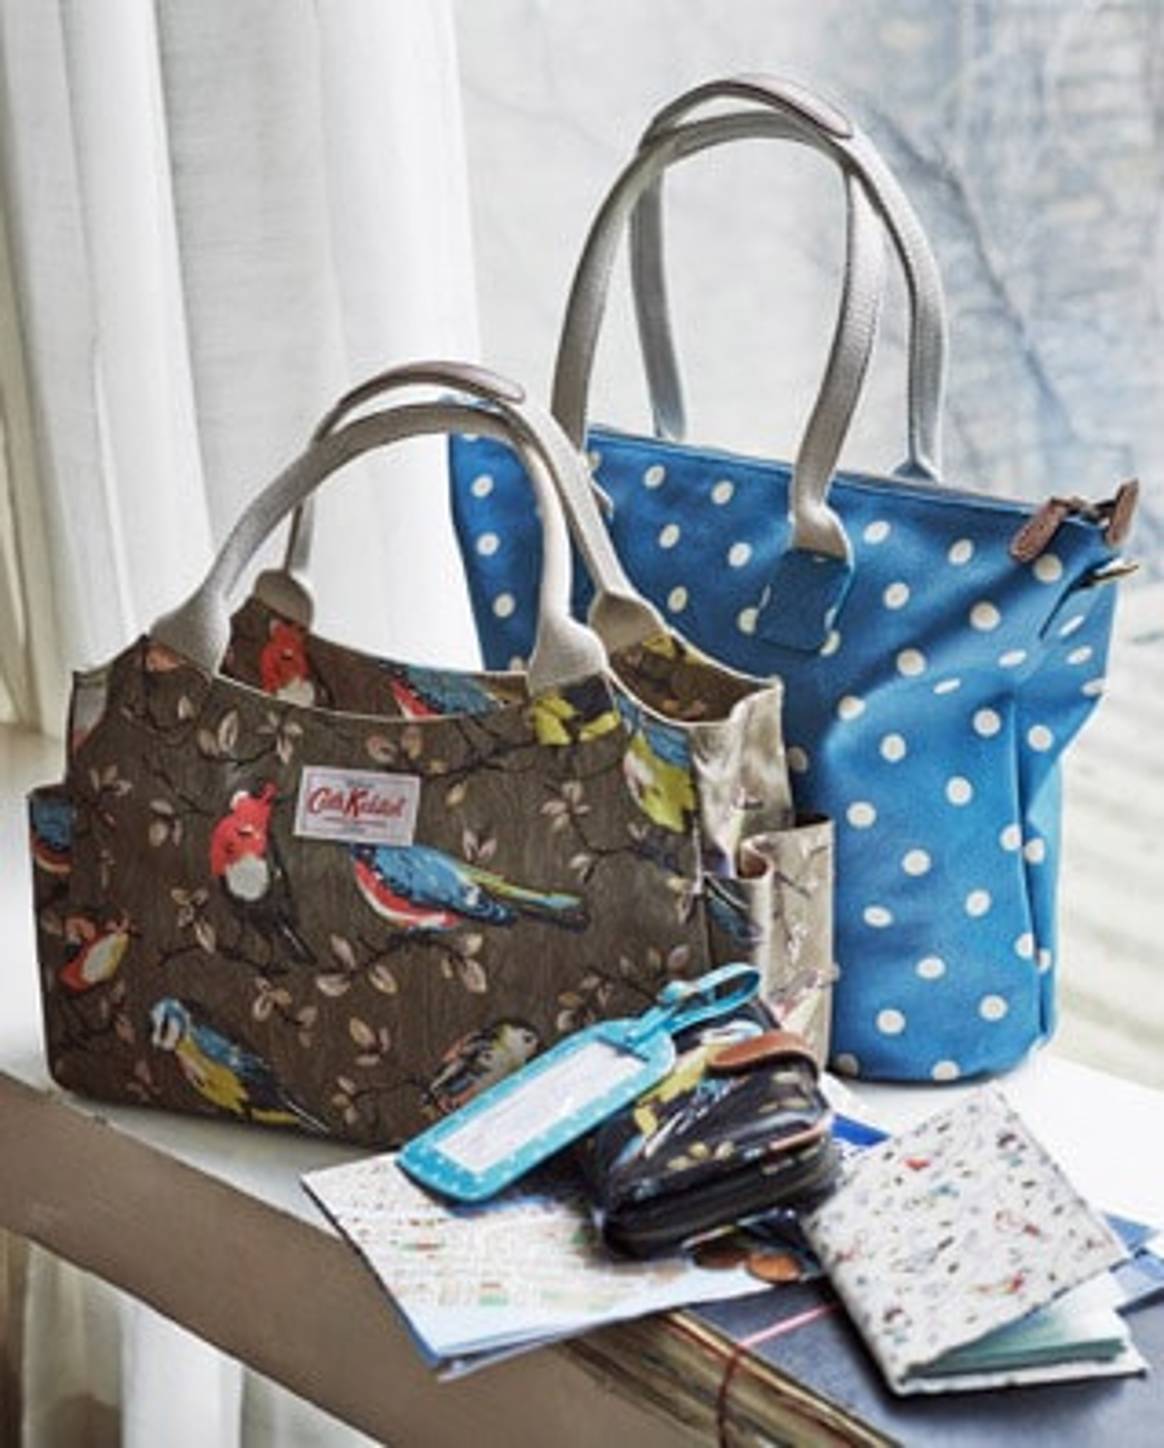 Cath Kidston benefits from “broad appeal” in Asia & UK